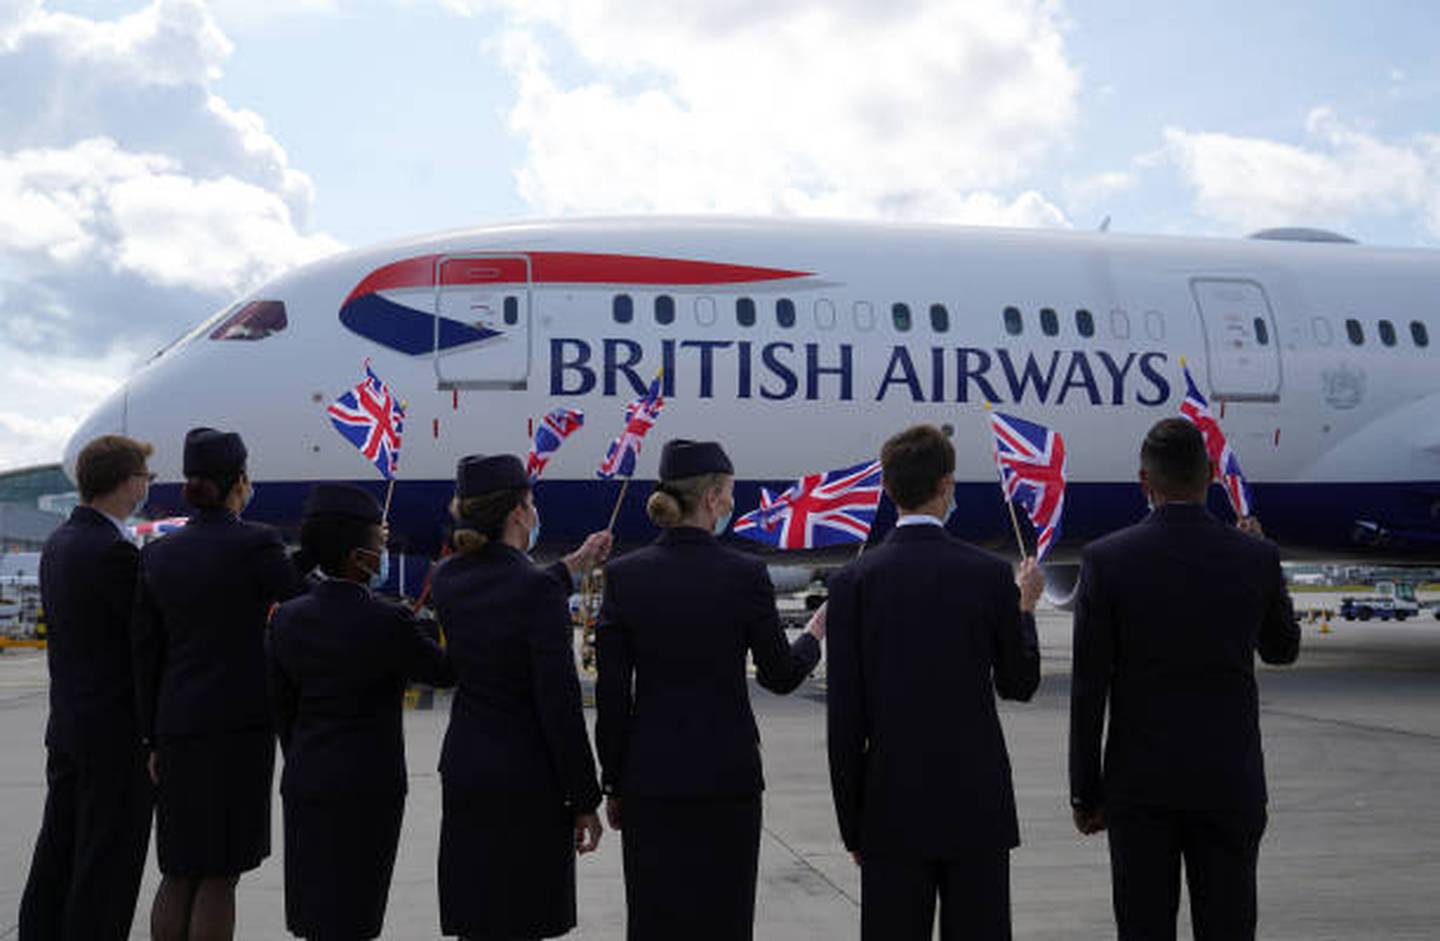 British Airways staff called off a strike in July after accepting a pay increase. PA